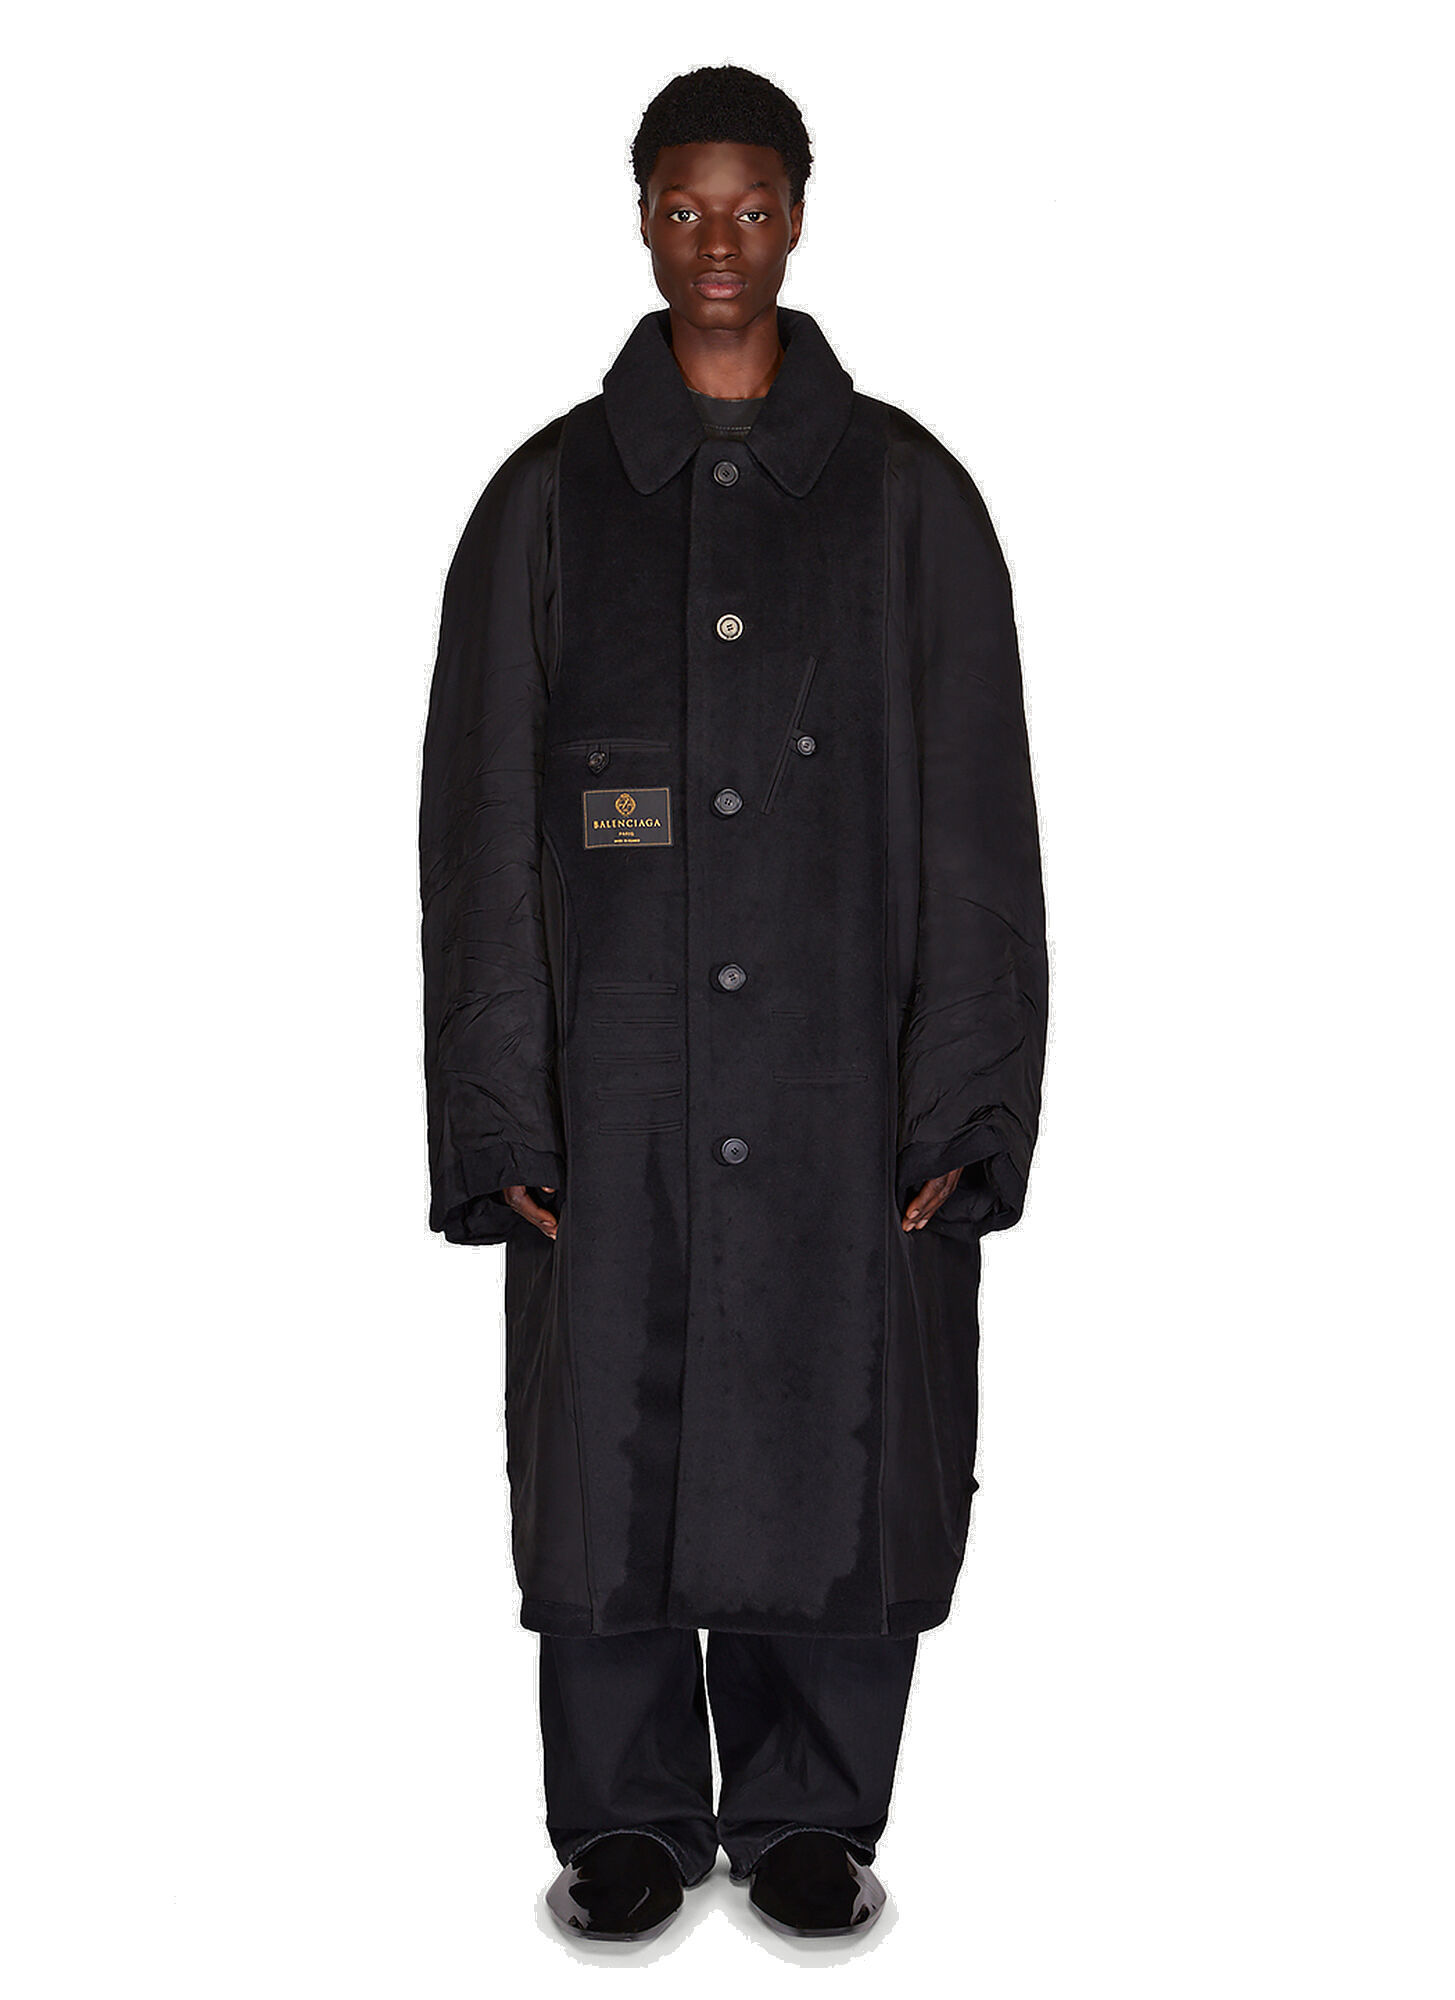 Inside Out Carcoat in Black Balenciaga